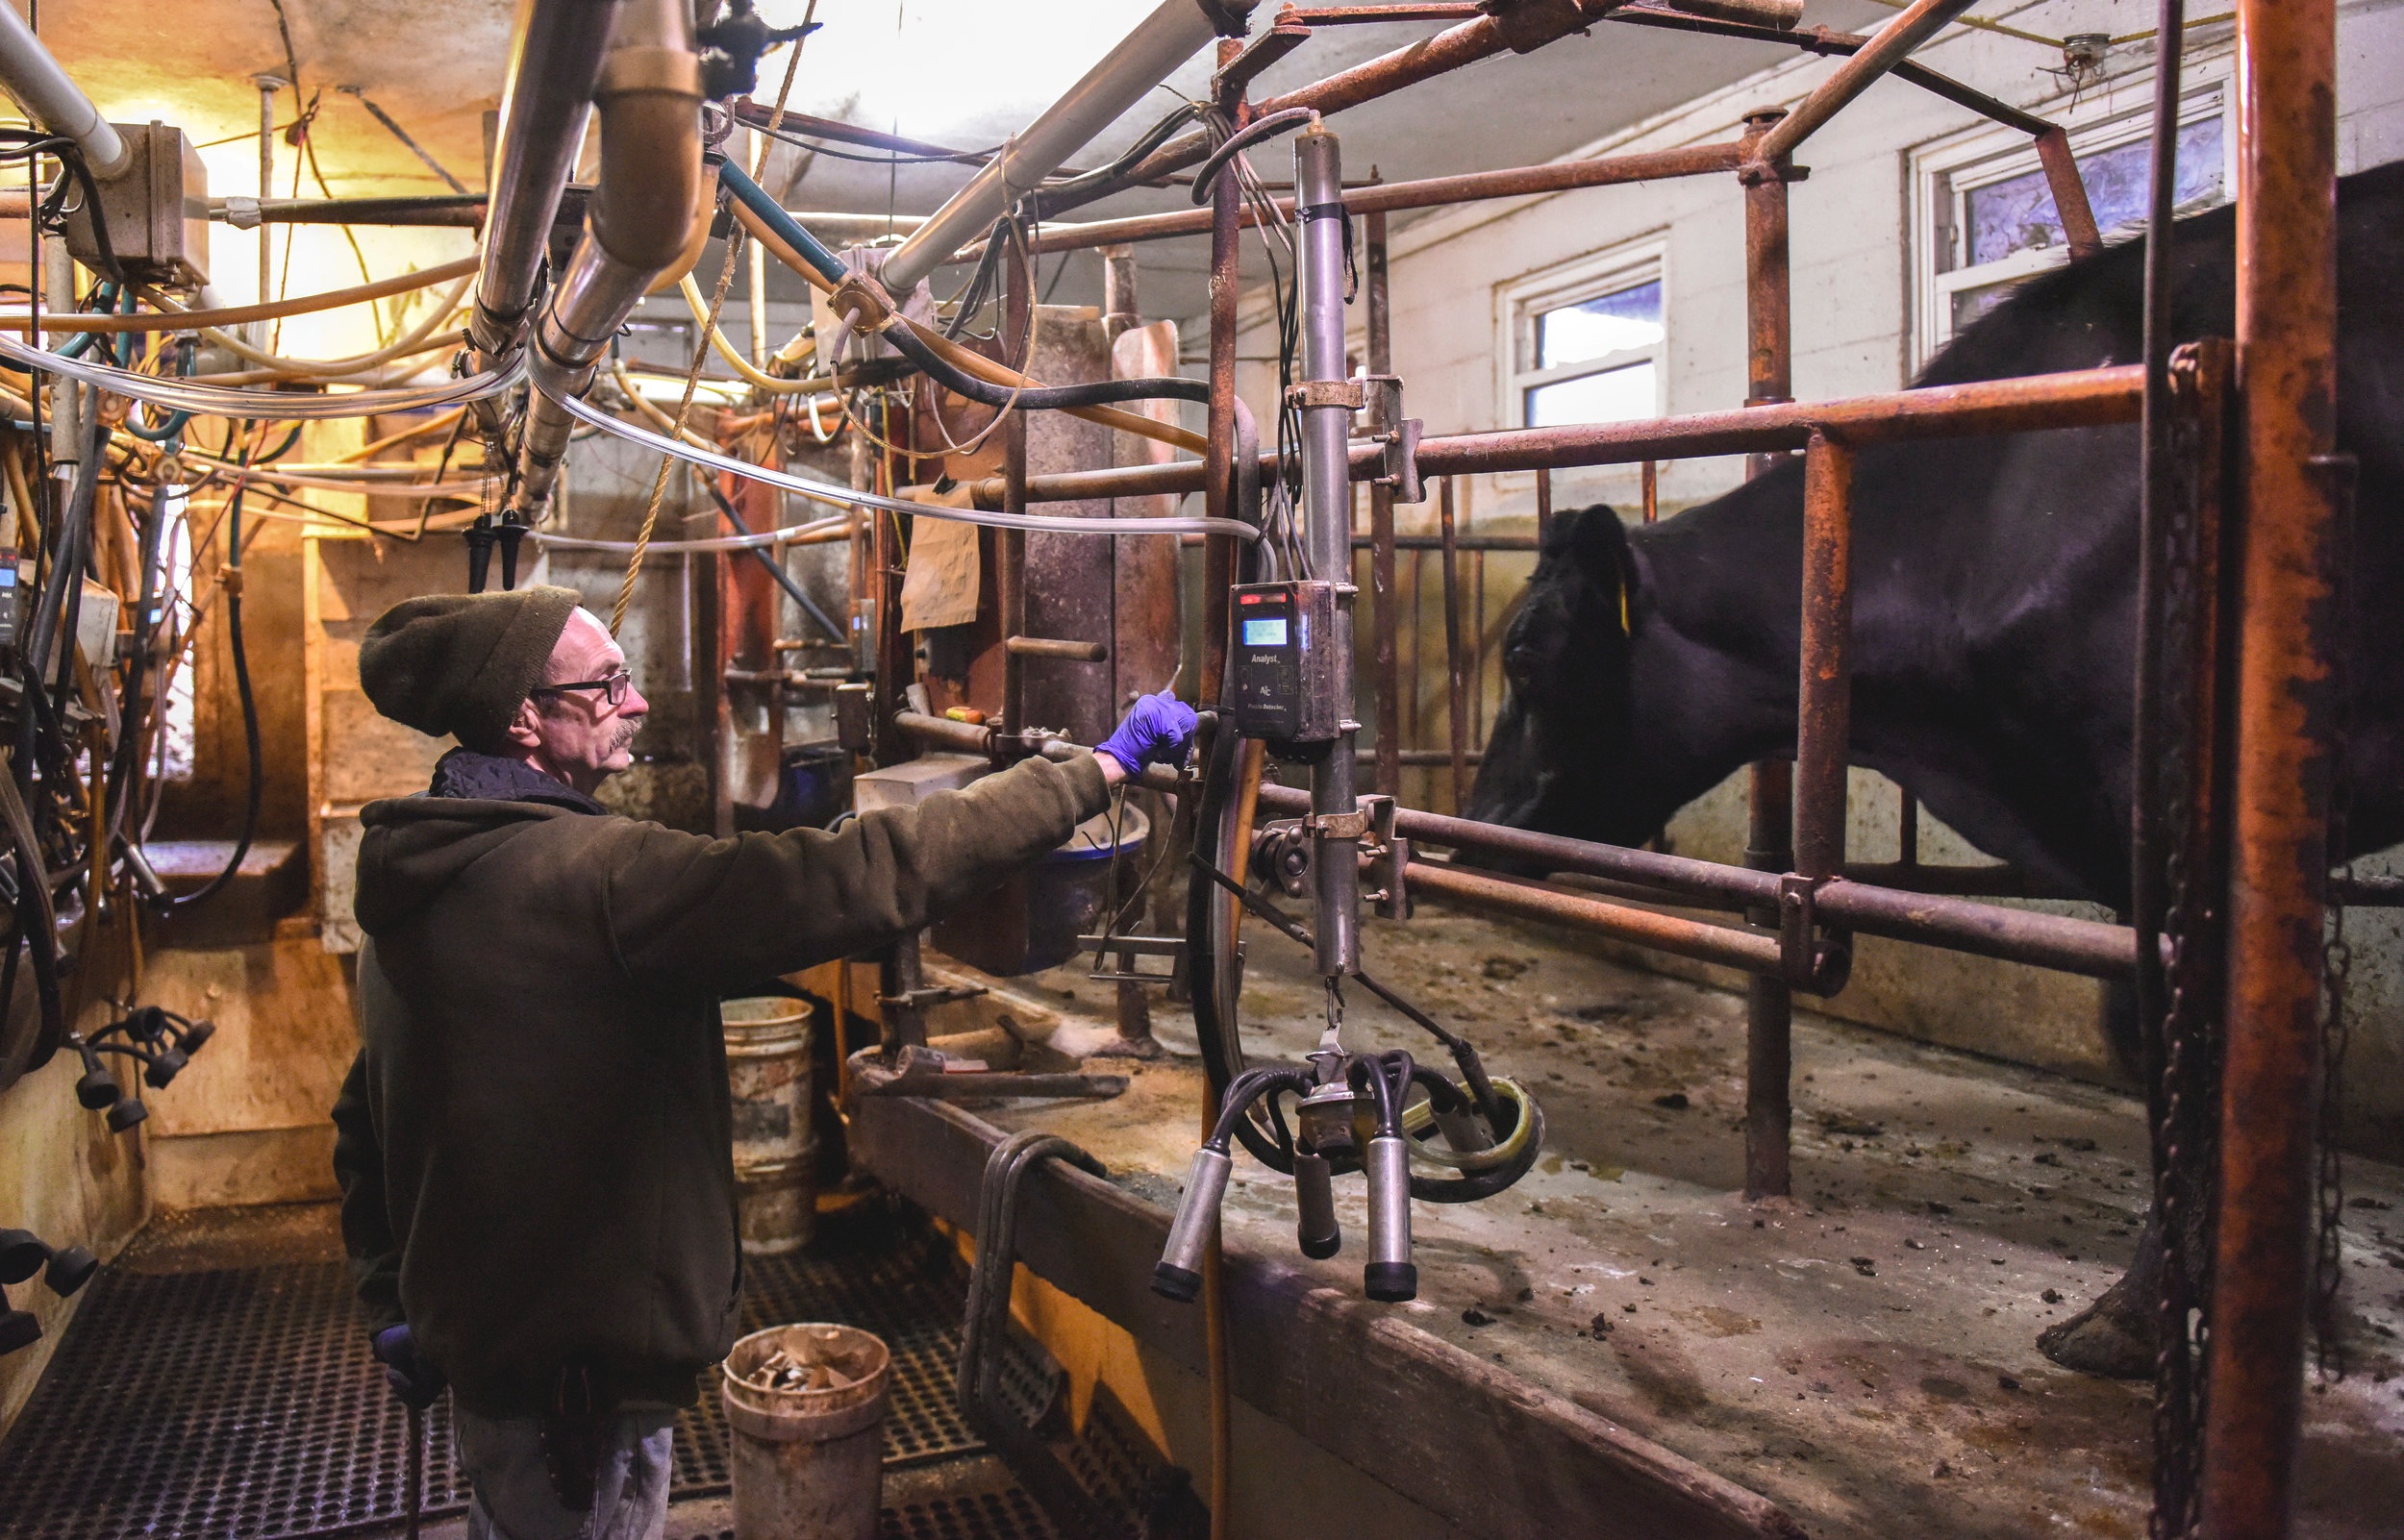  Bob DePauw brings in his cows for their first round of milking in the milking parlor Saturday, May 11, in Port Bryon. Twice a day the cows at Trinity Acres are milked. Bob knows the cows' preferences, such as which stall they prefer and whether they